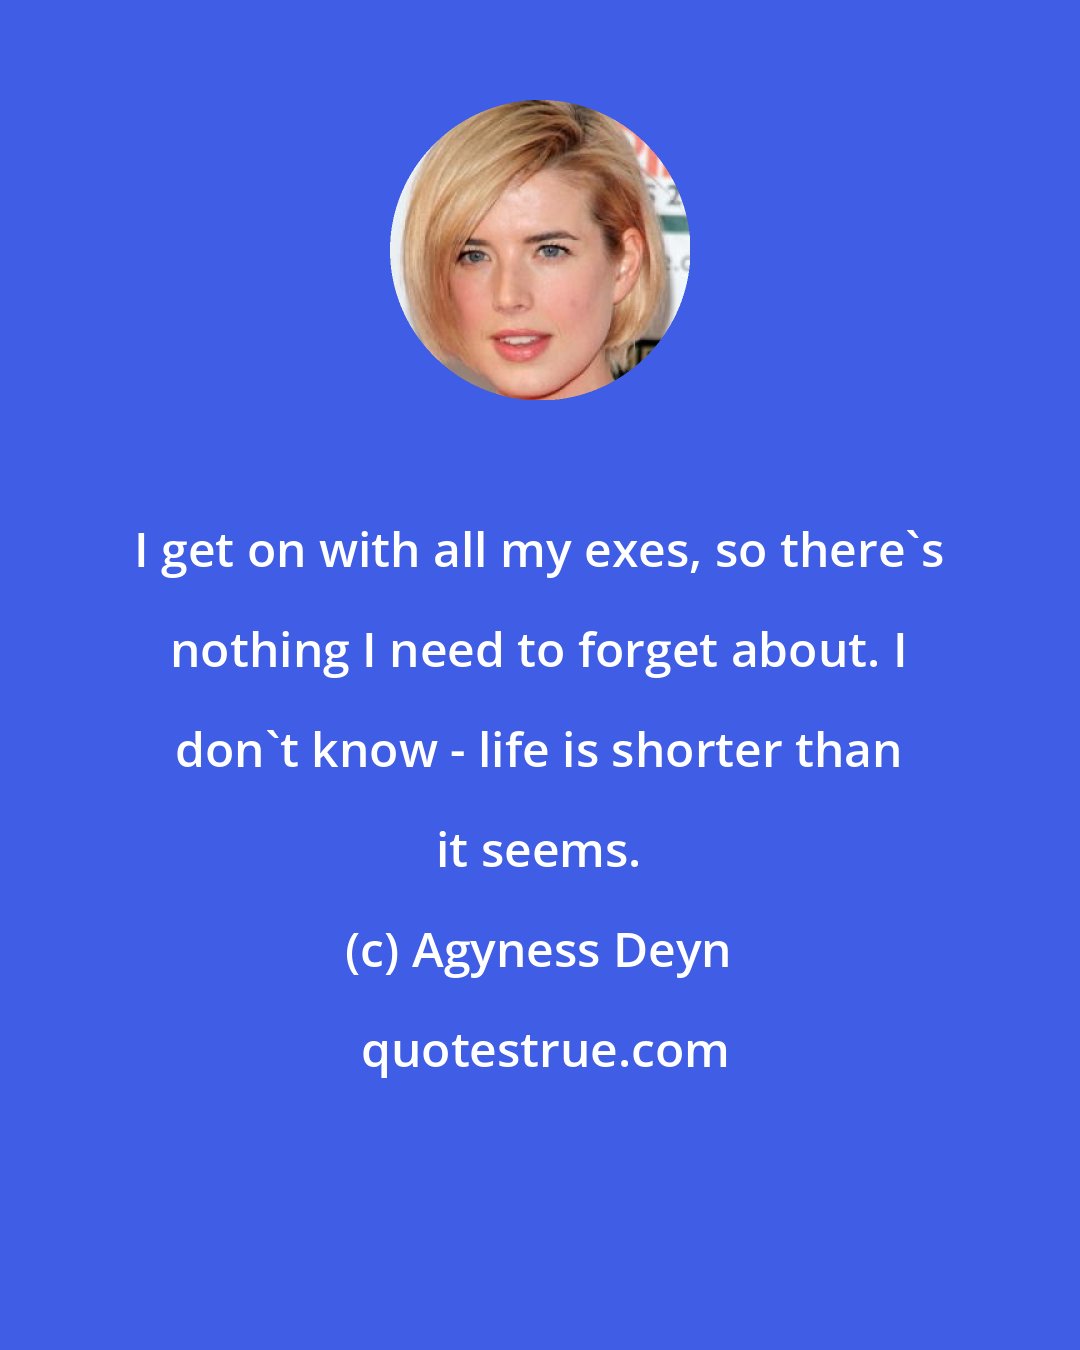 Agyness Deyn: I get on with all my exes, so there's nothing I need to forget about. I don't know - life is shorter than it seems.